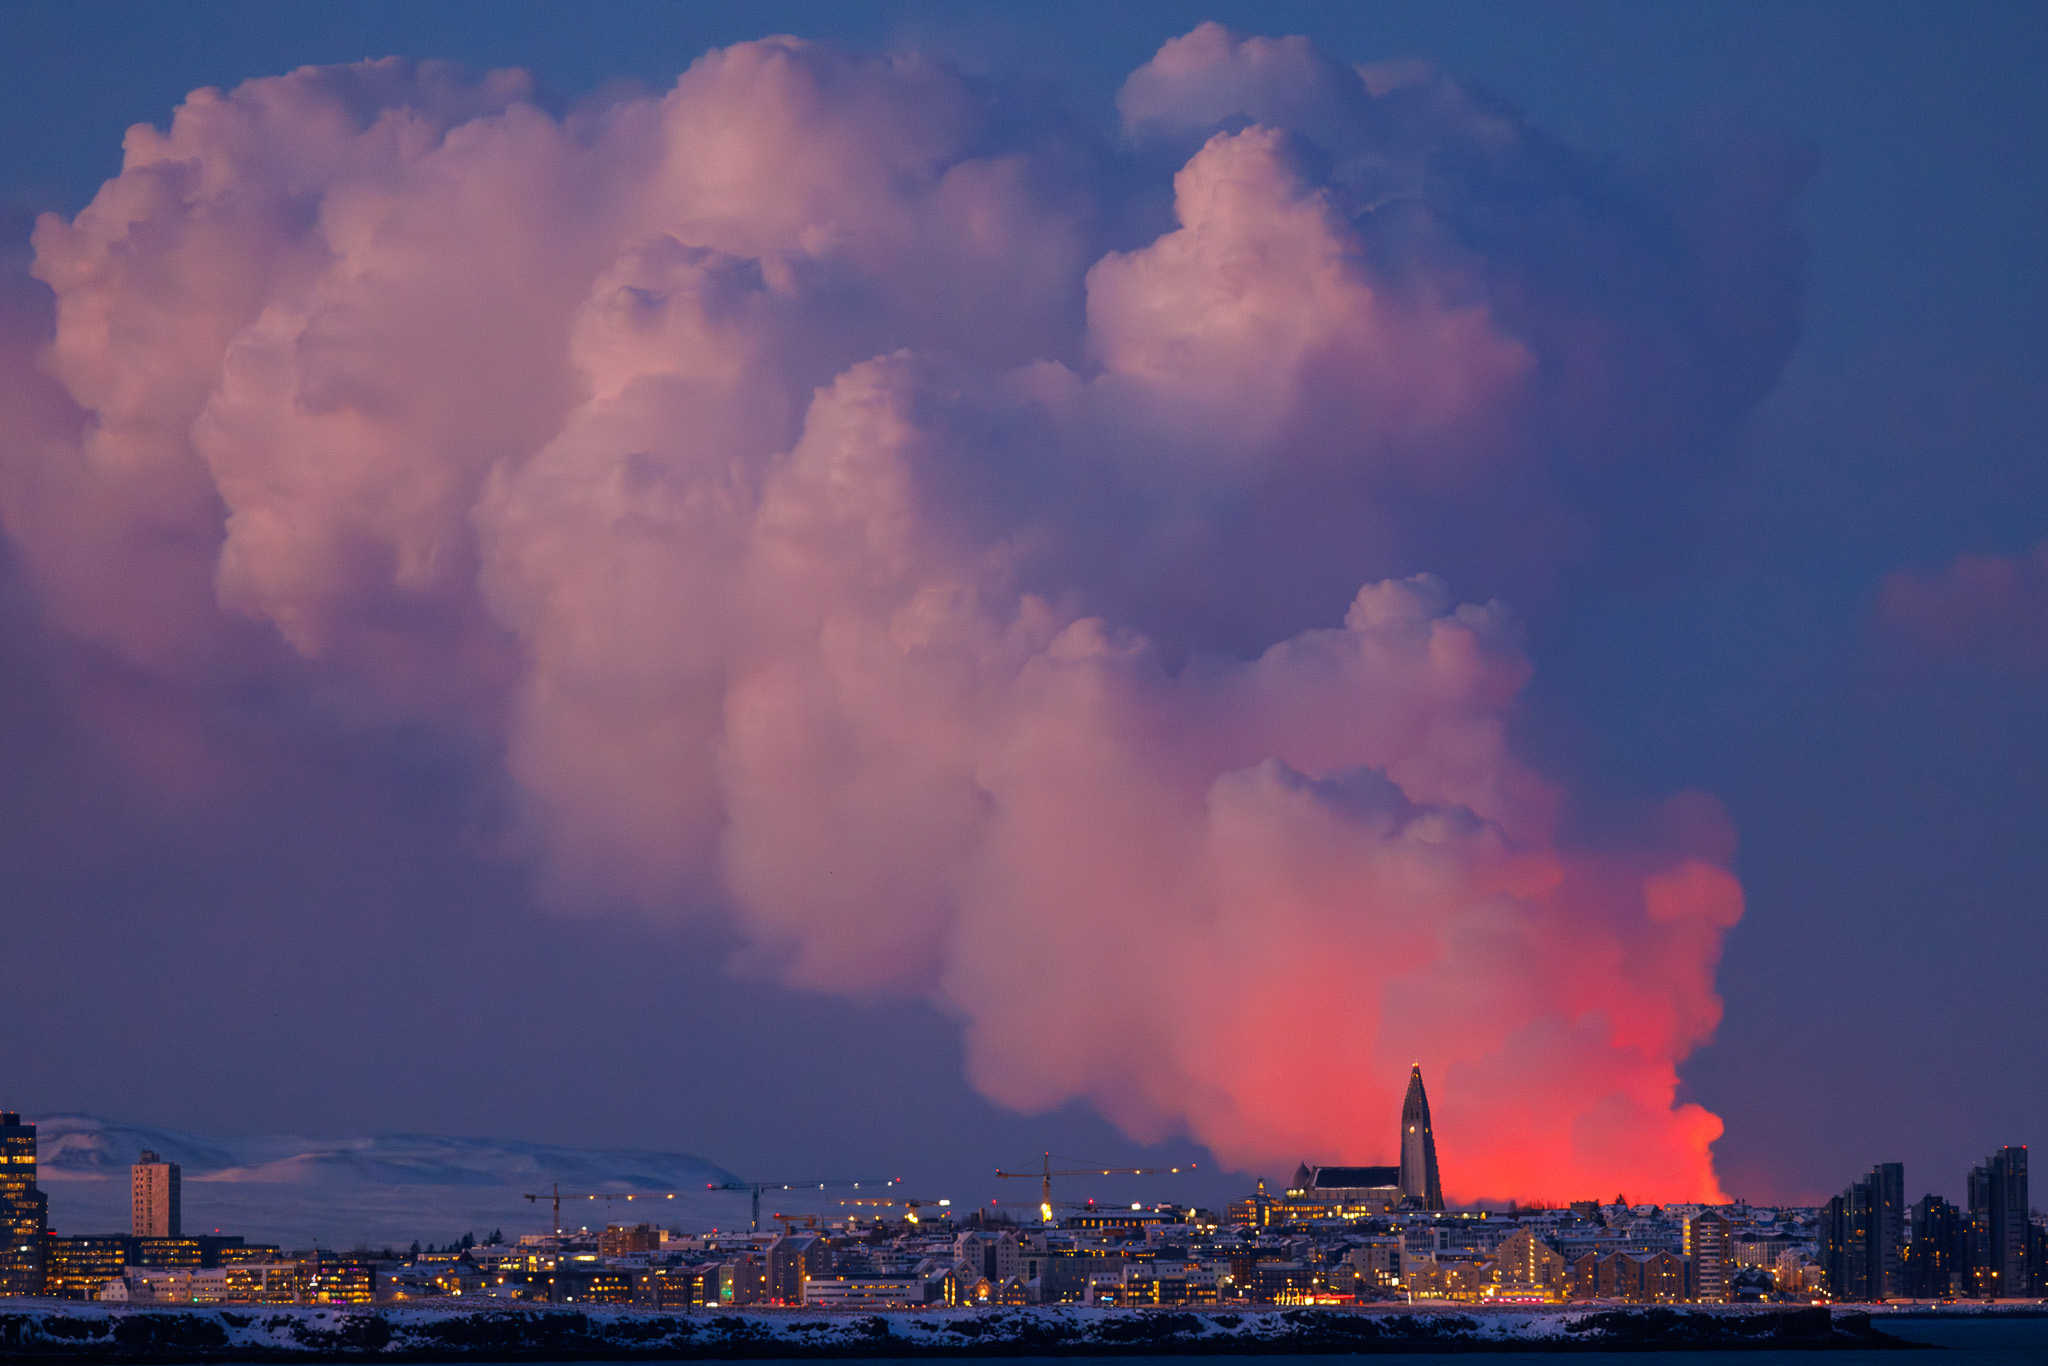 3 Years Of Photographing Eruptions In Iceland - What I’ve Learned